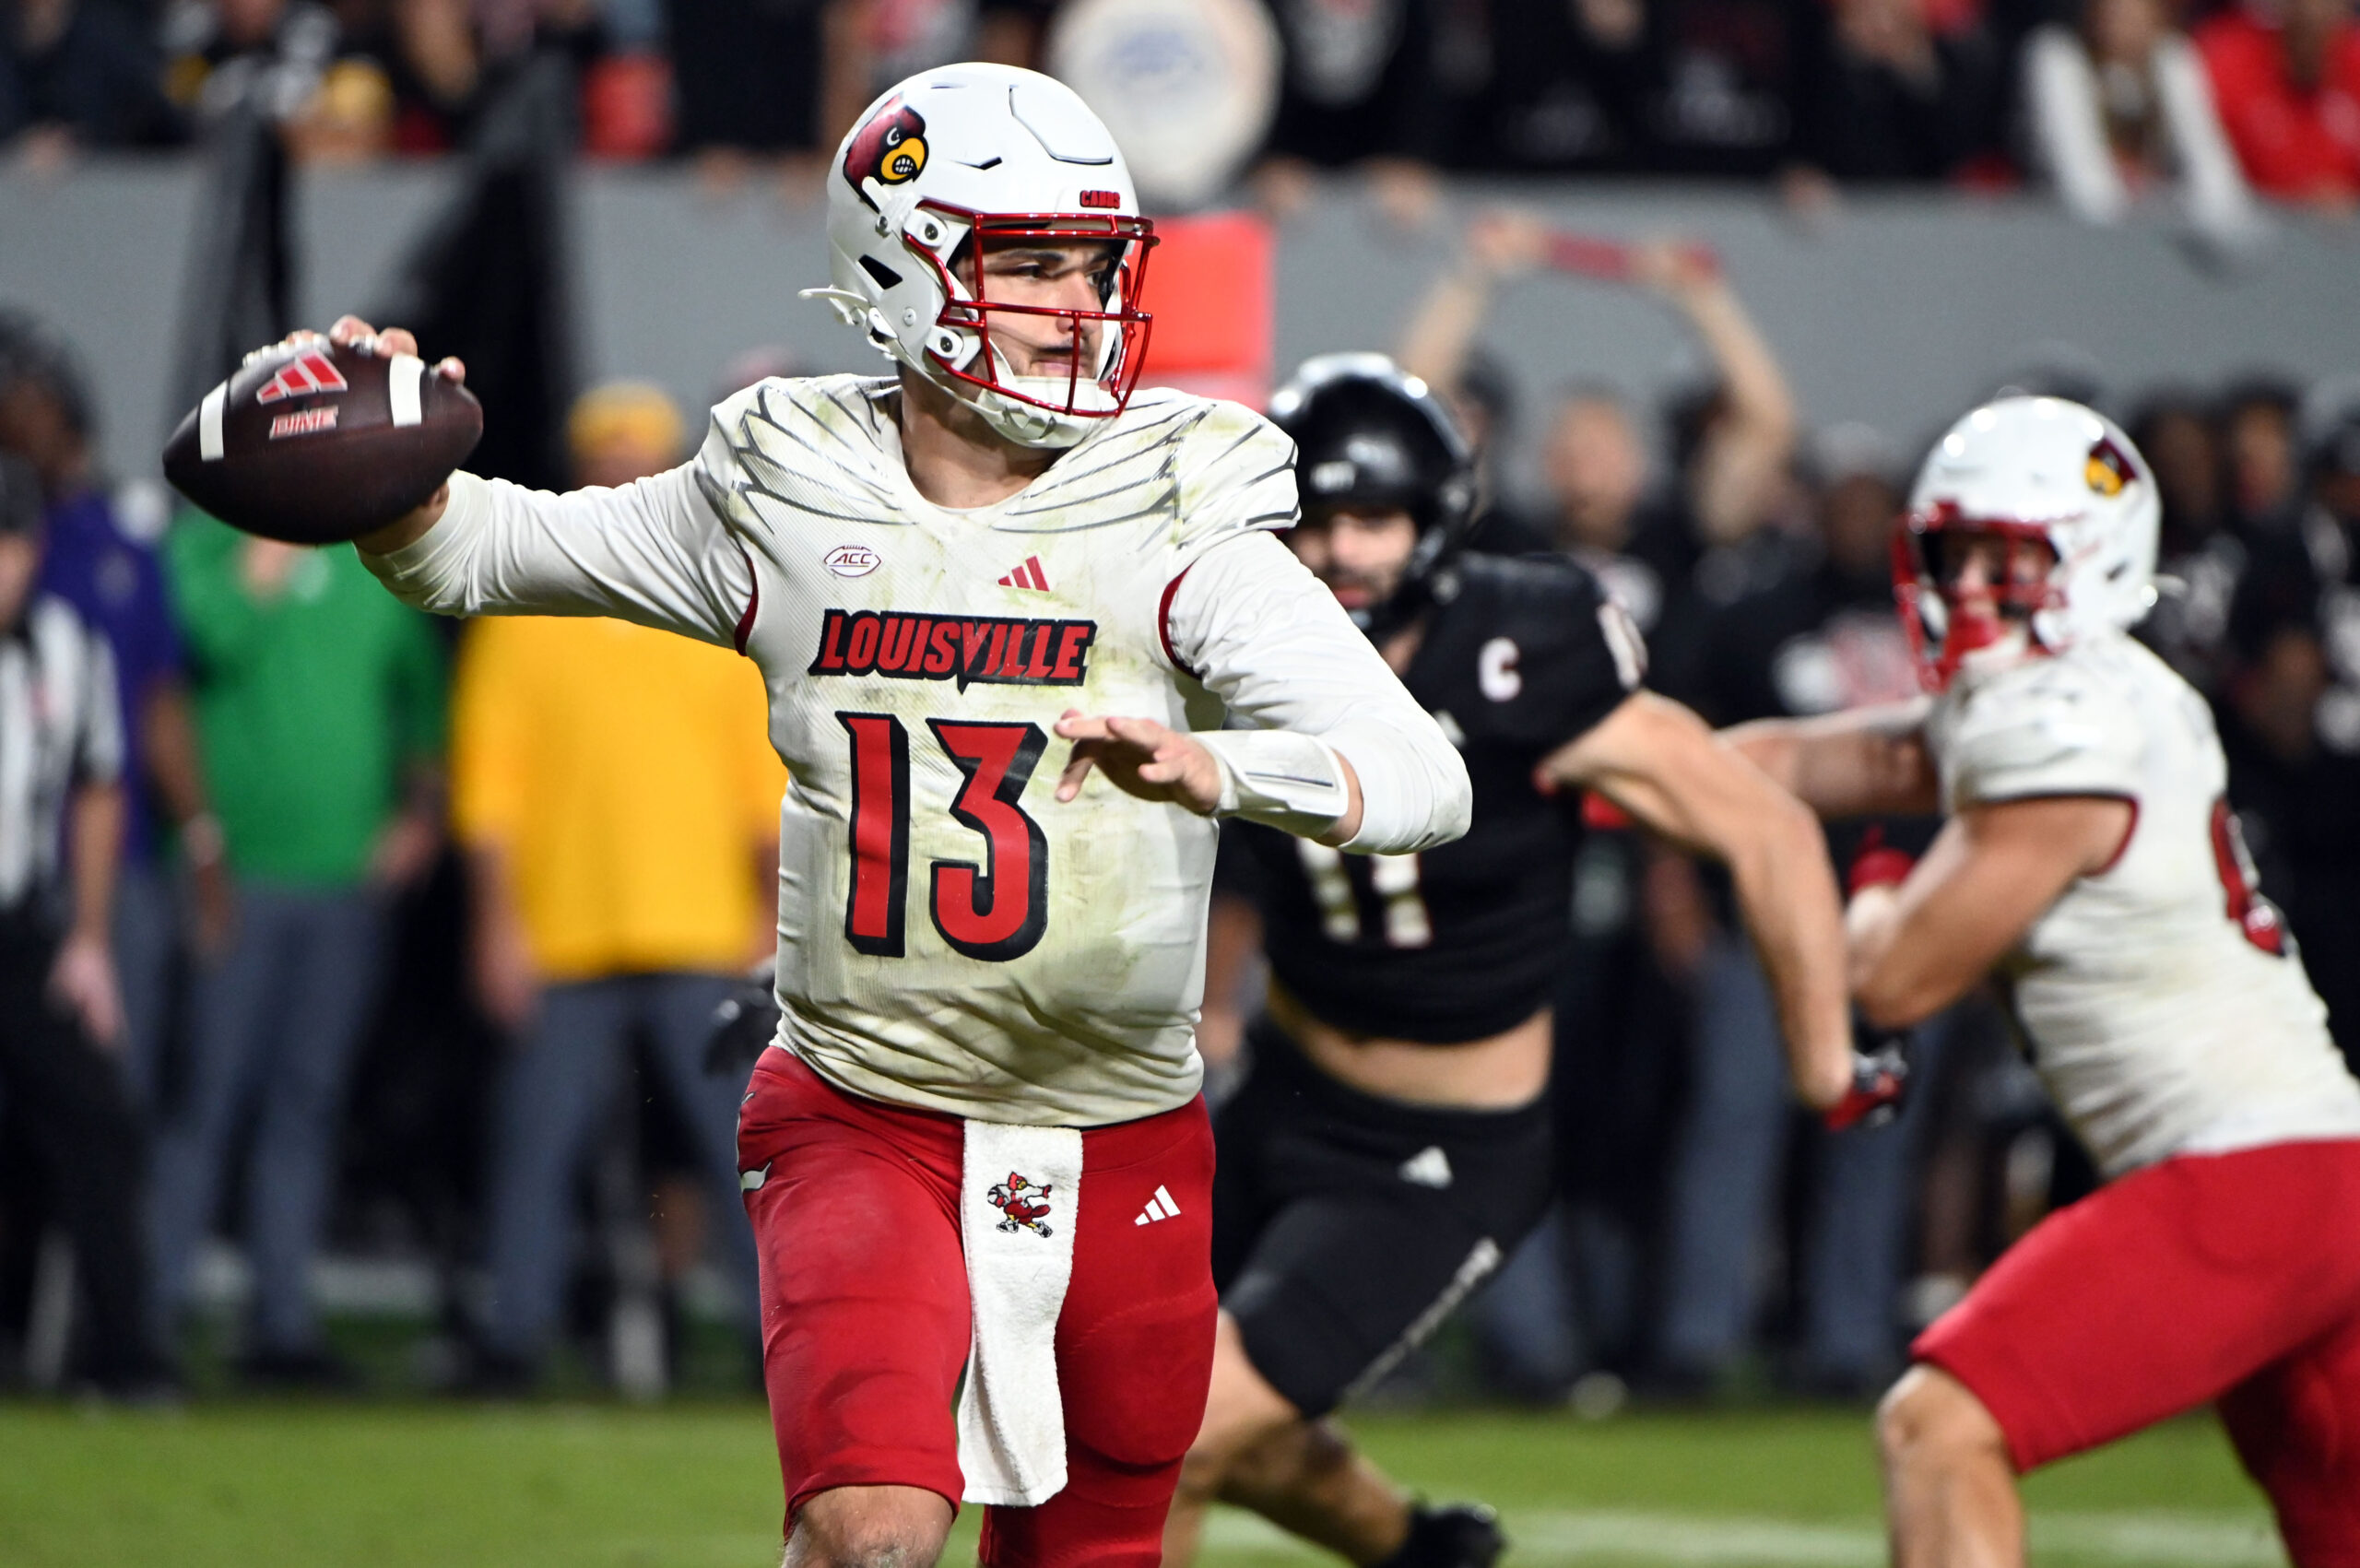 Cardinals Drop Opening Game to No. 2 Wake Forest - University of